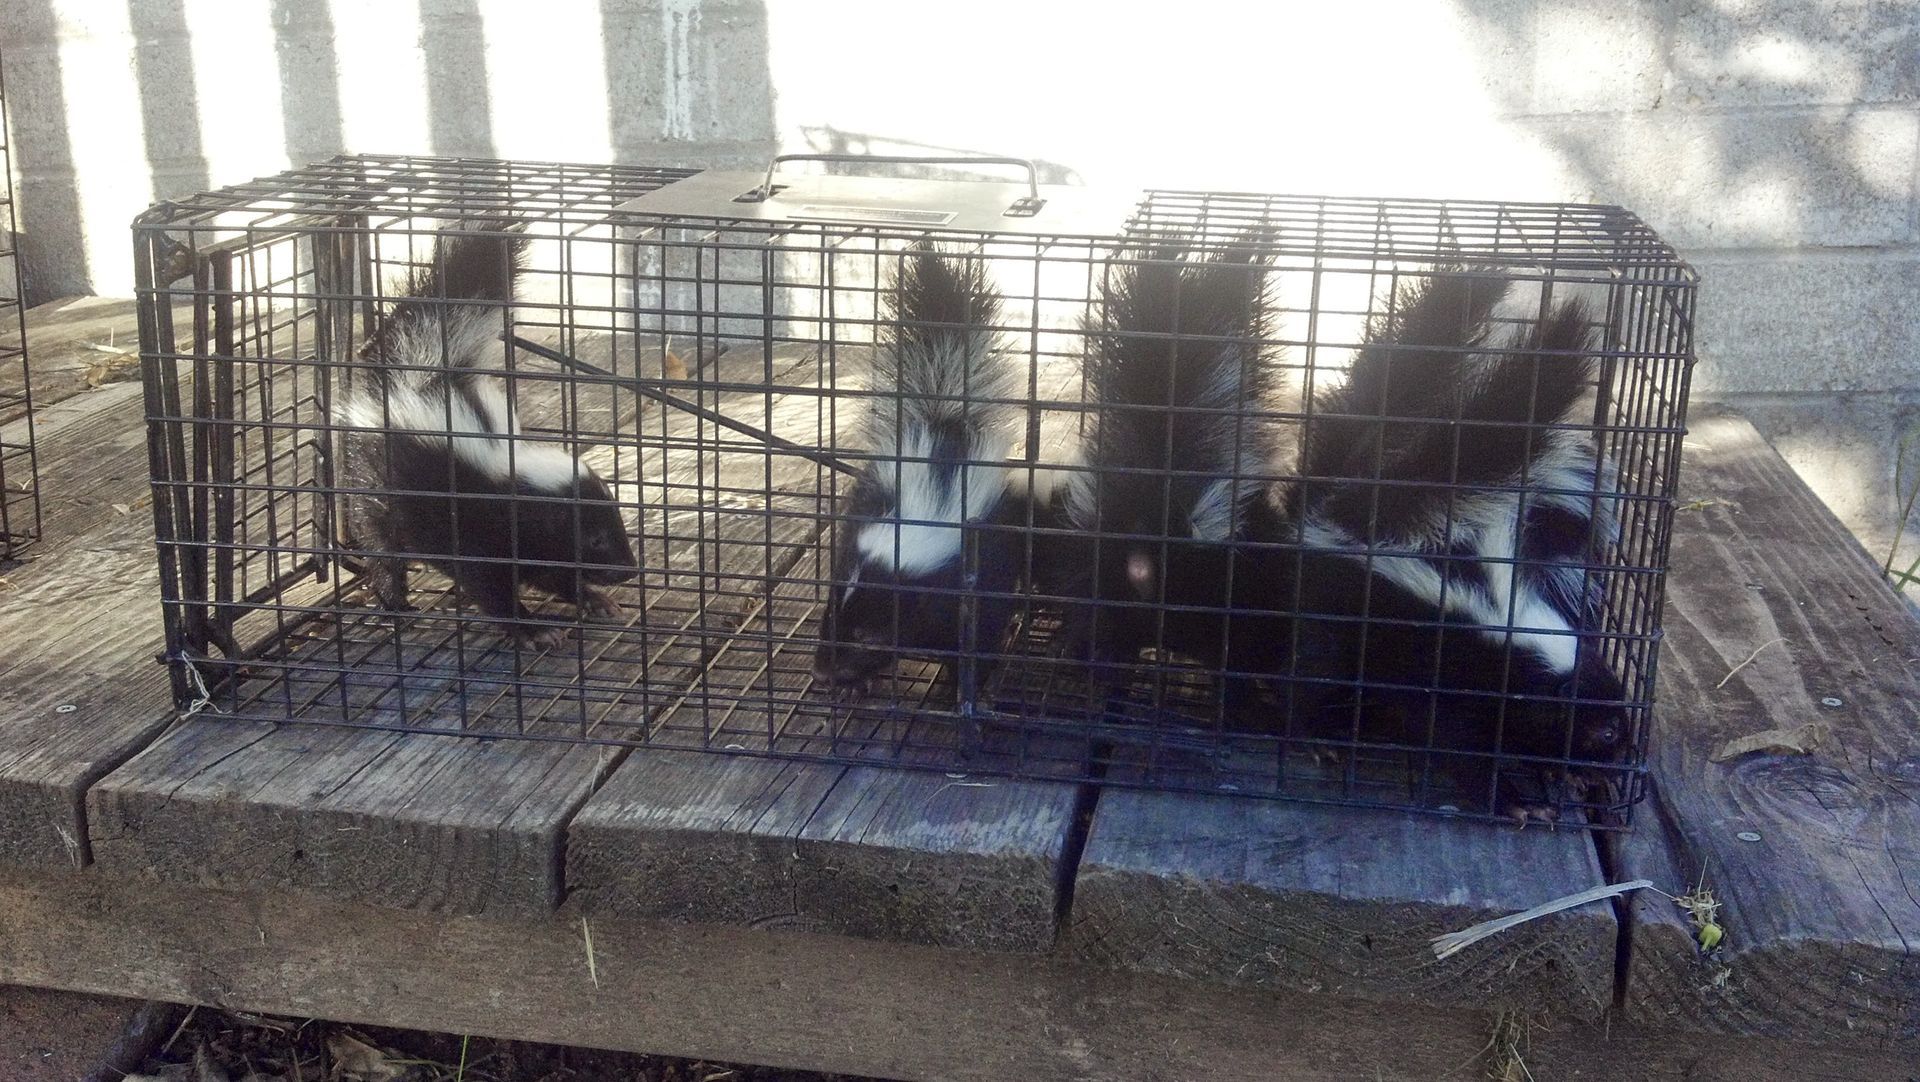 Three skunks are sitting in a wire cage.